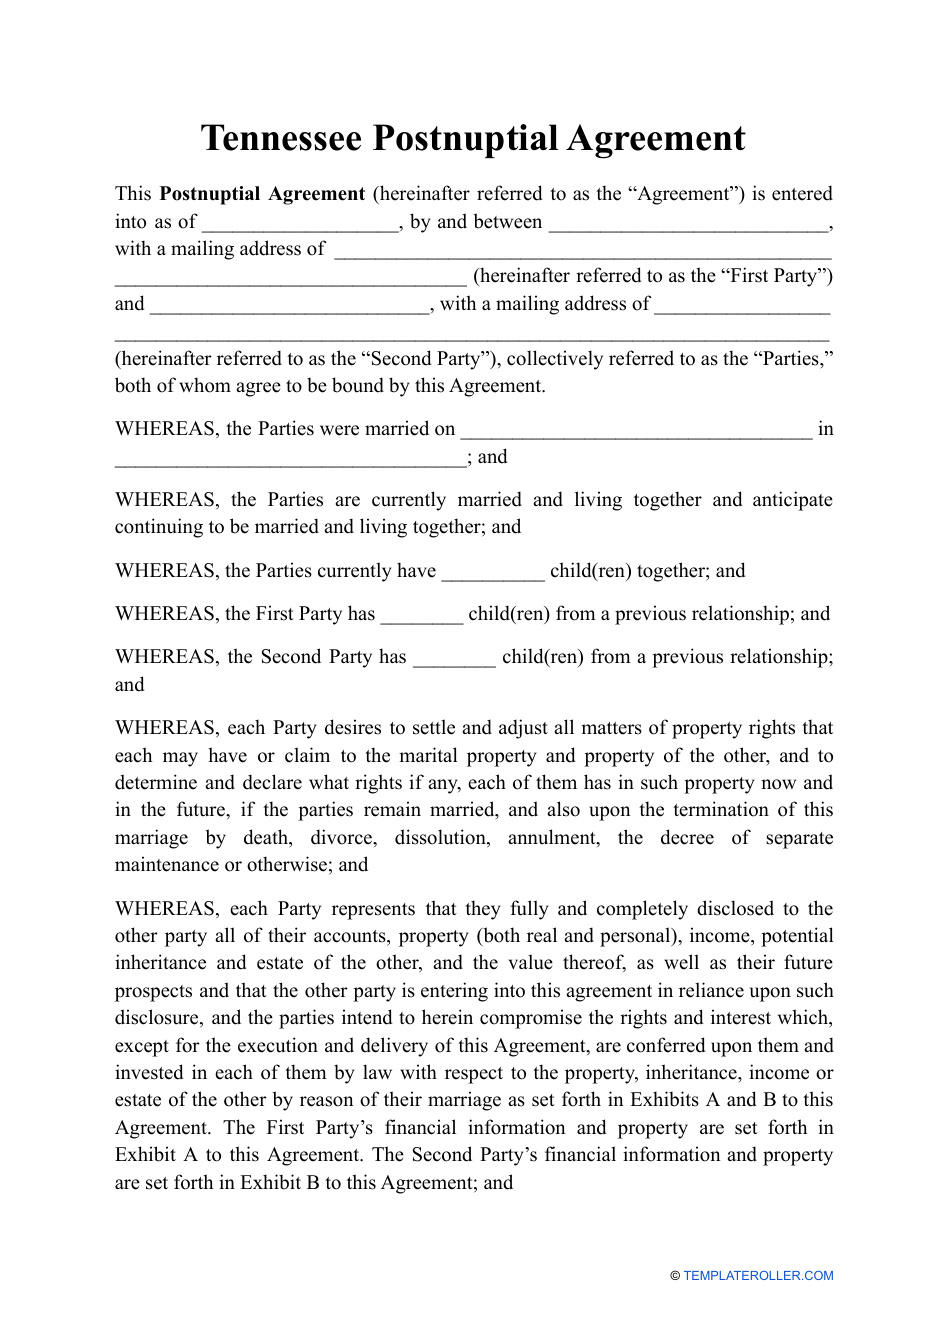 Postnuptial Agreement Template - Tennessee, Page 1